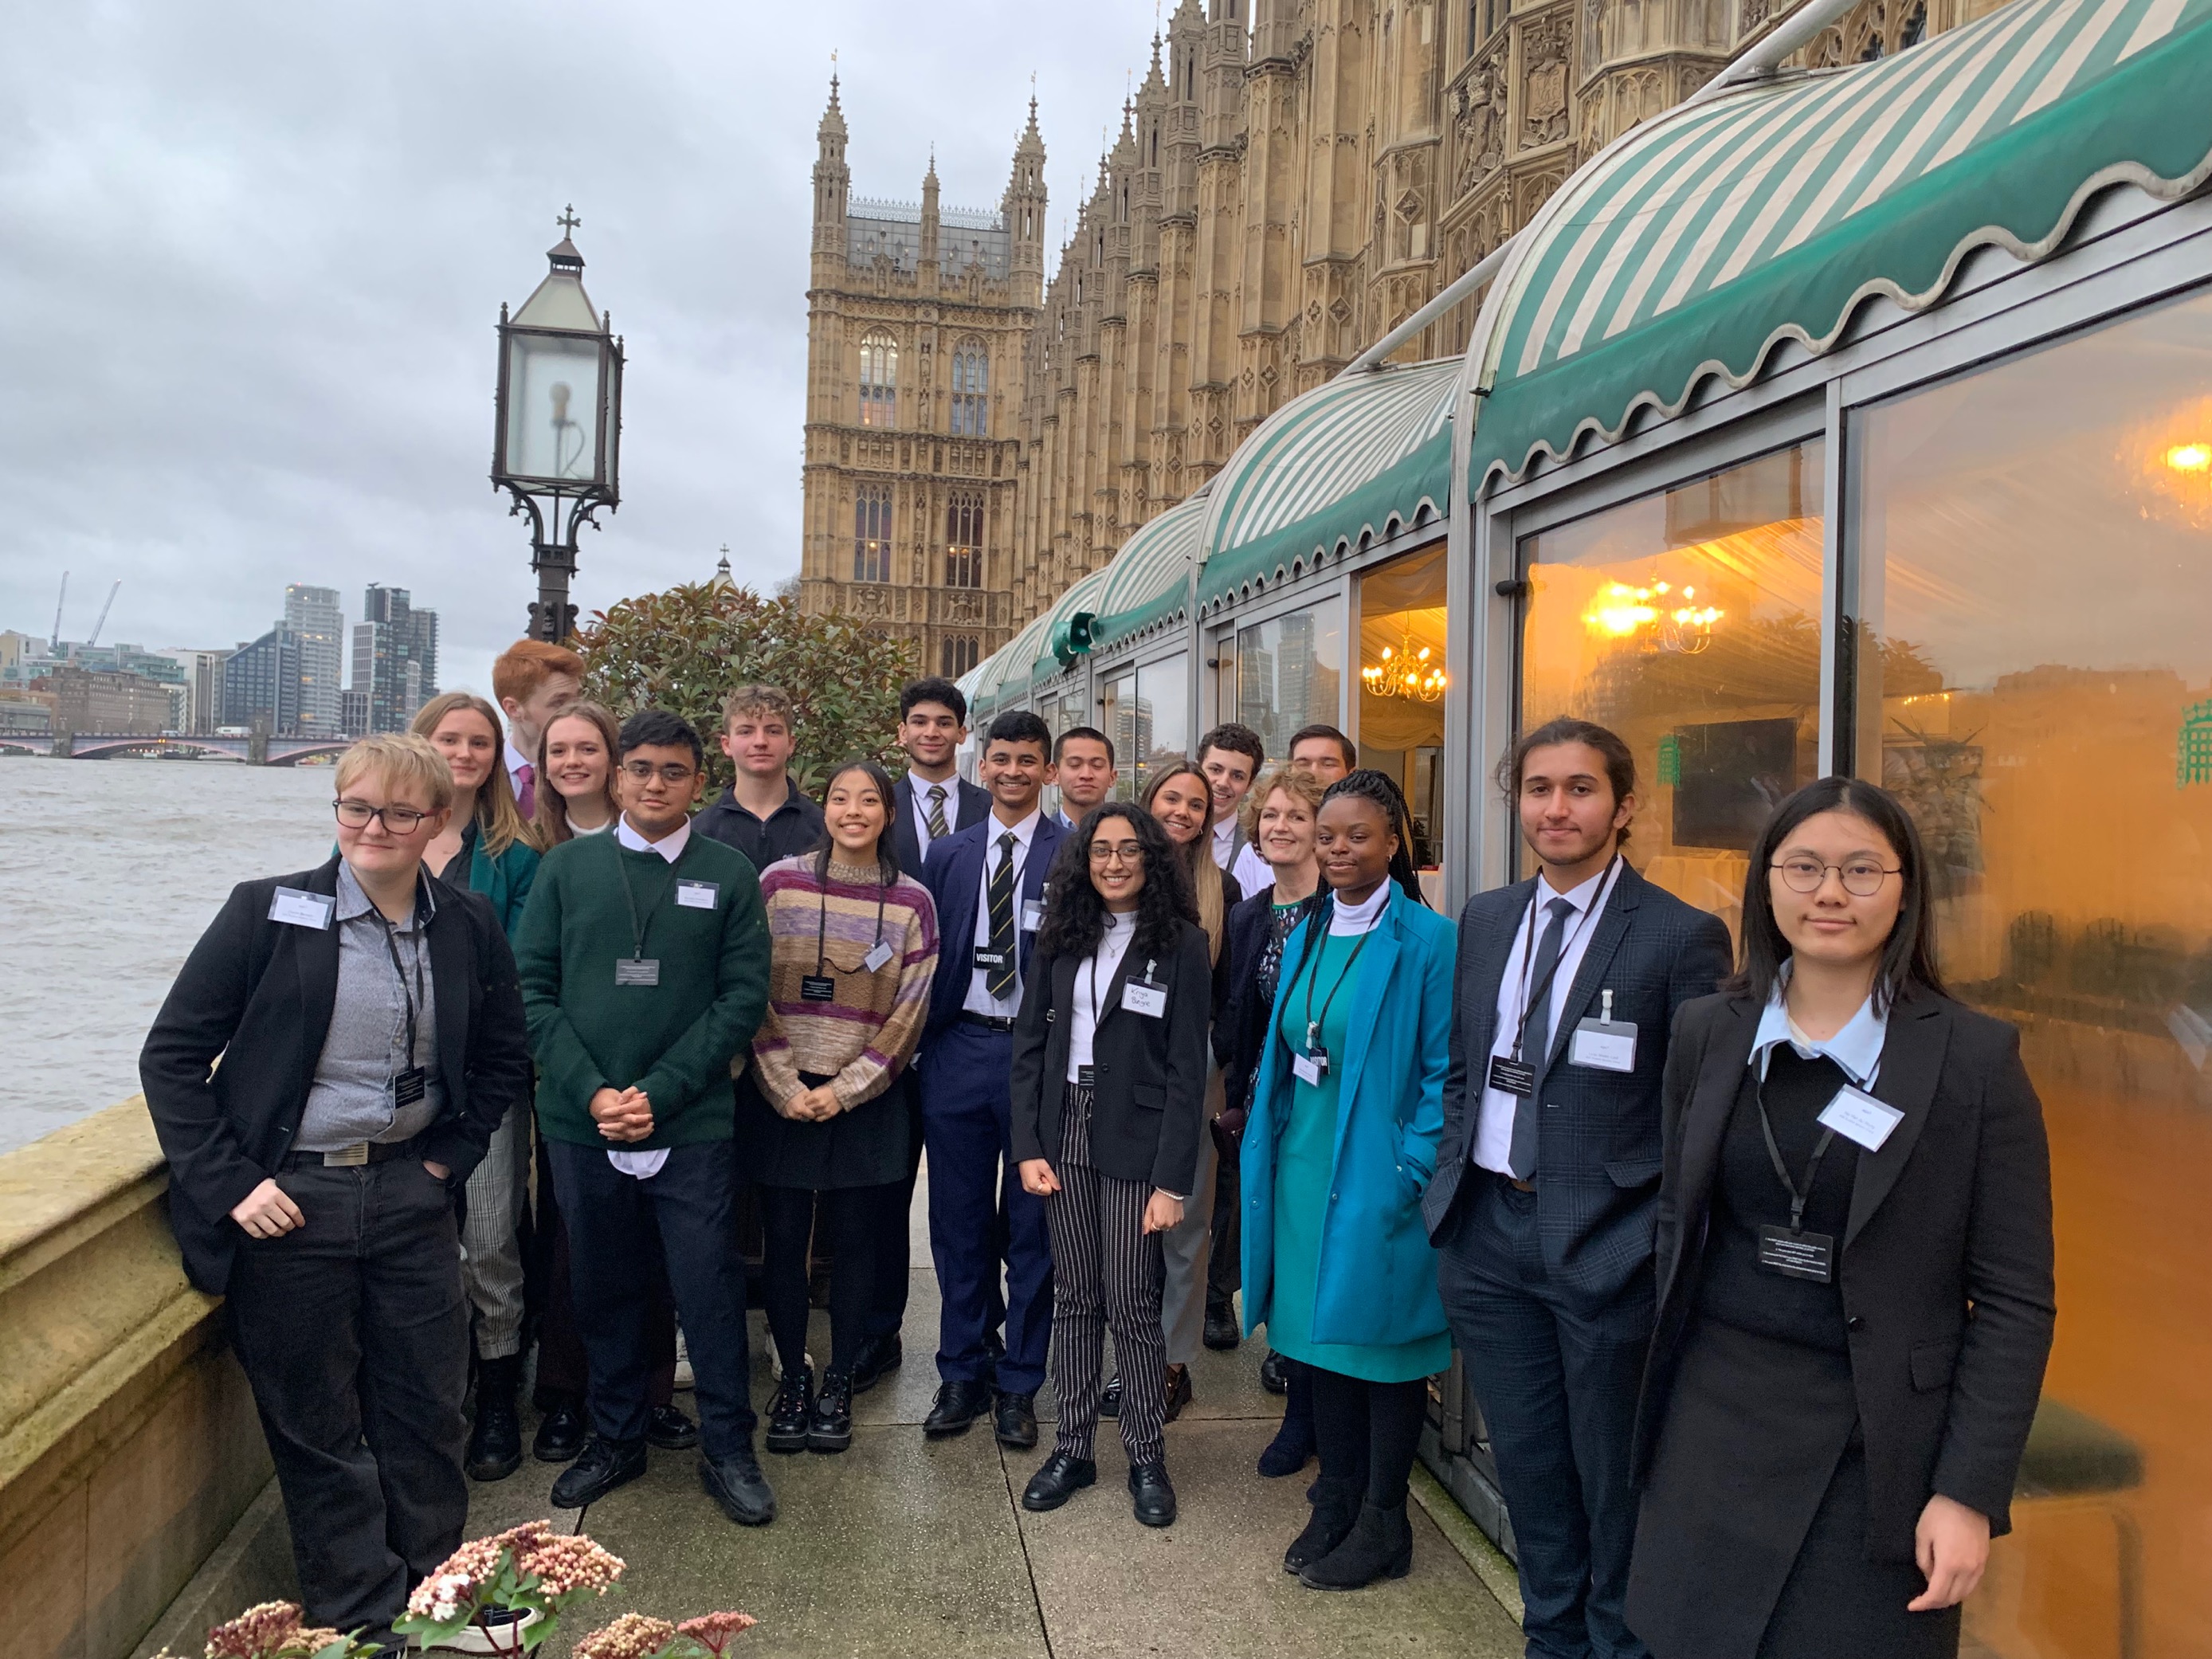 Members of the AQA Student Advisory Group for 2023 gathered outside in London.